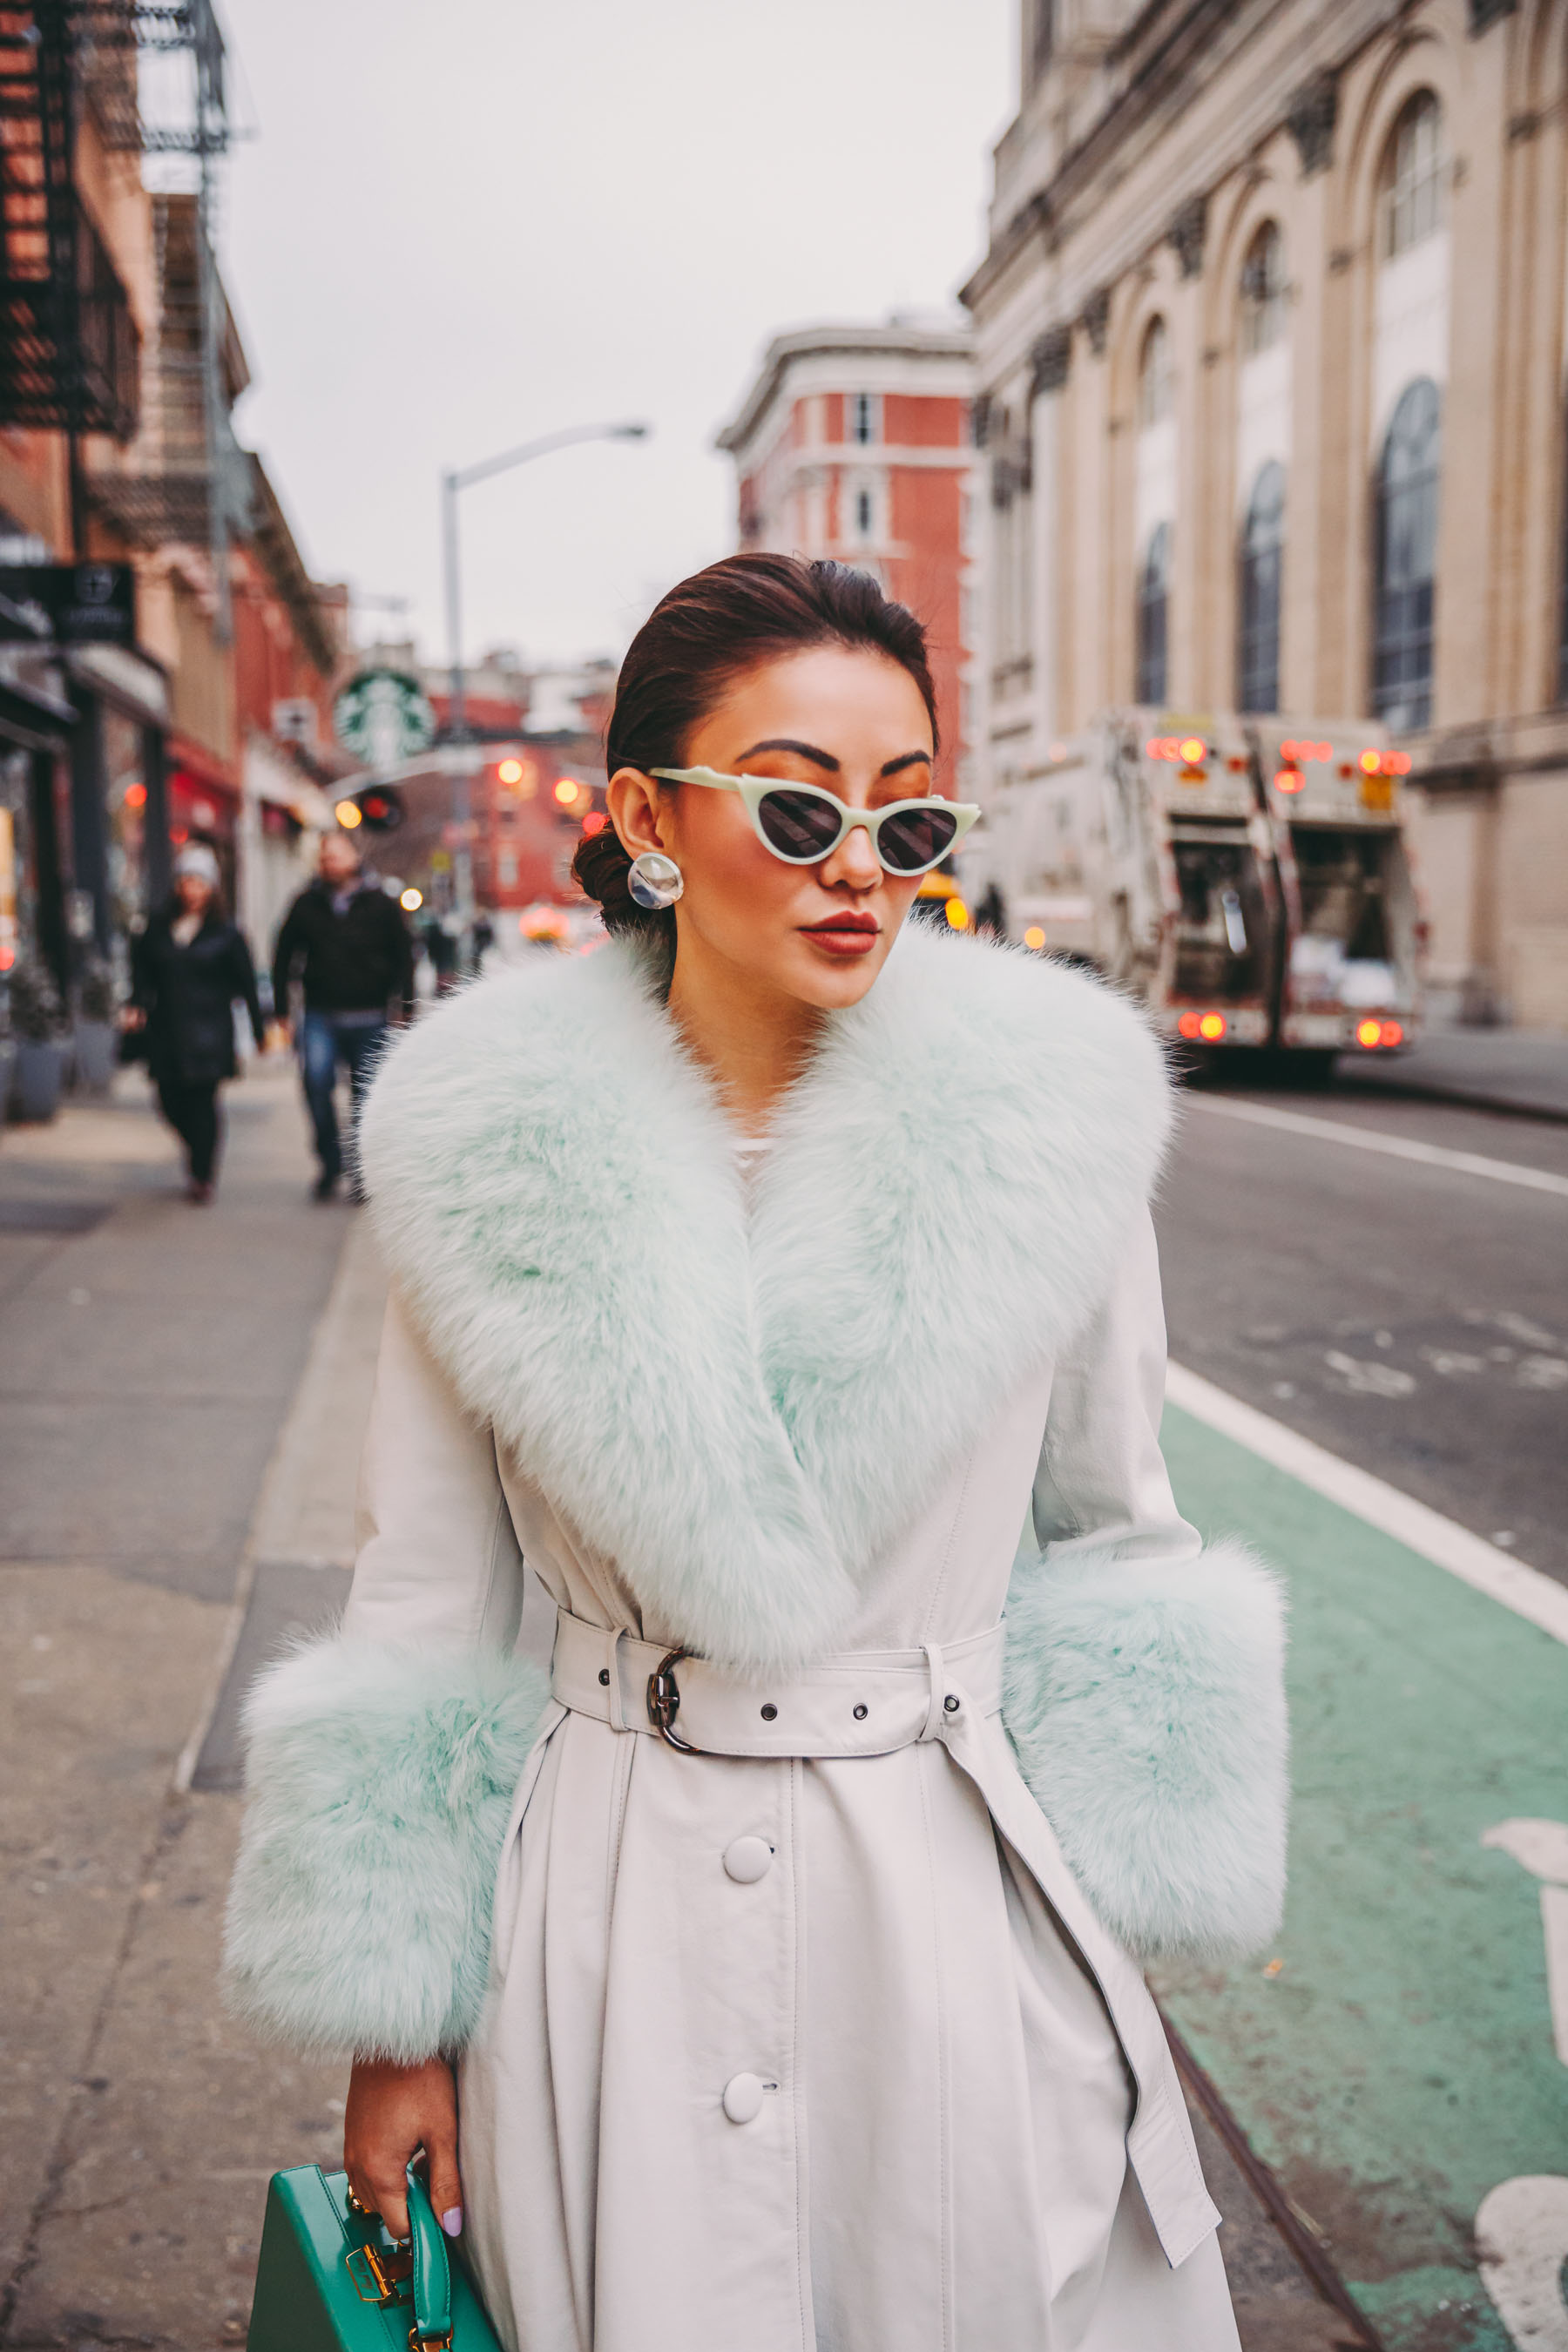 How to Wear Pastel in the winter - Mint fur coat, belted fur coat, nyfw street style, green sunglasses // Notjessfashion.com